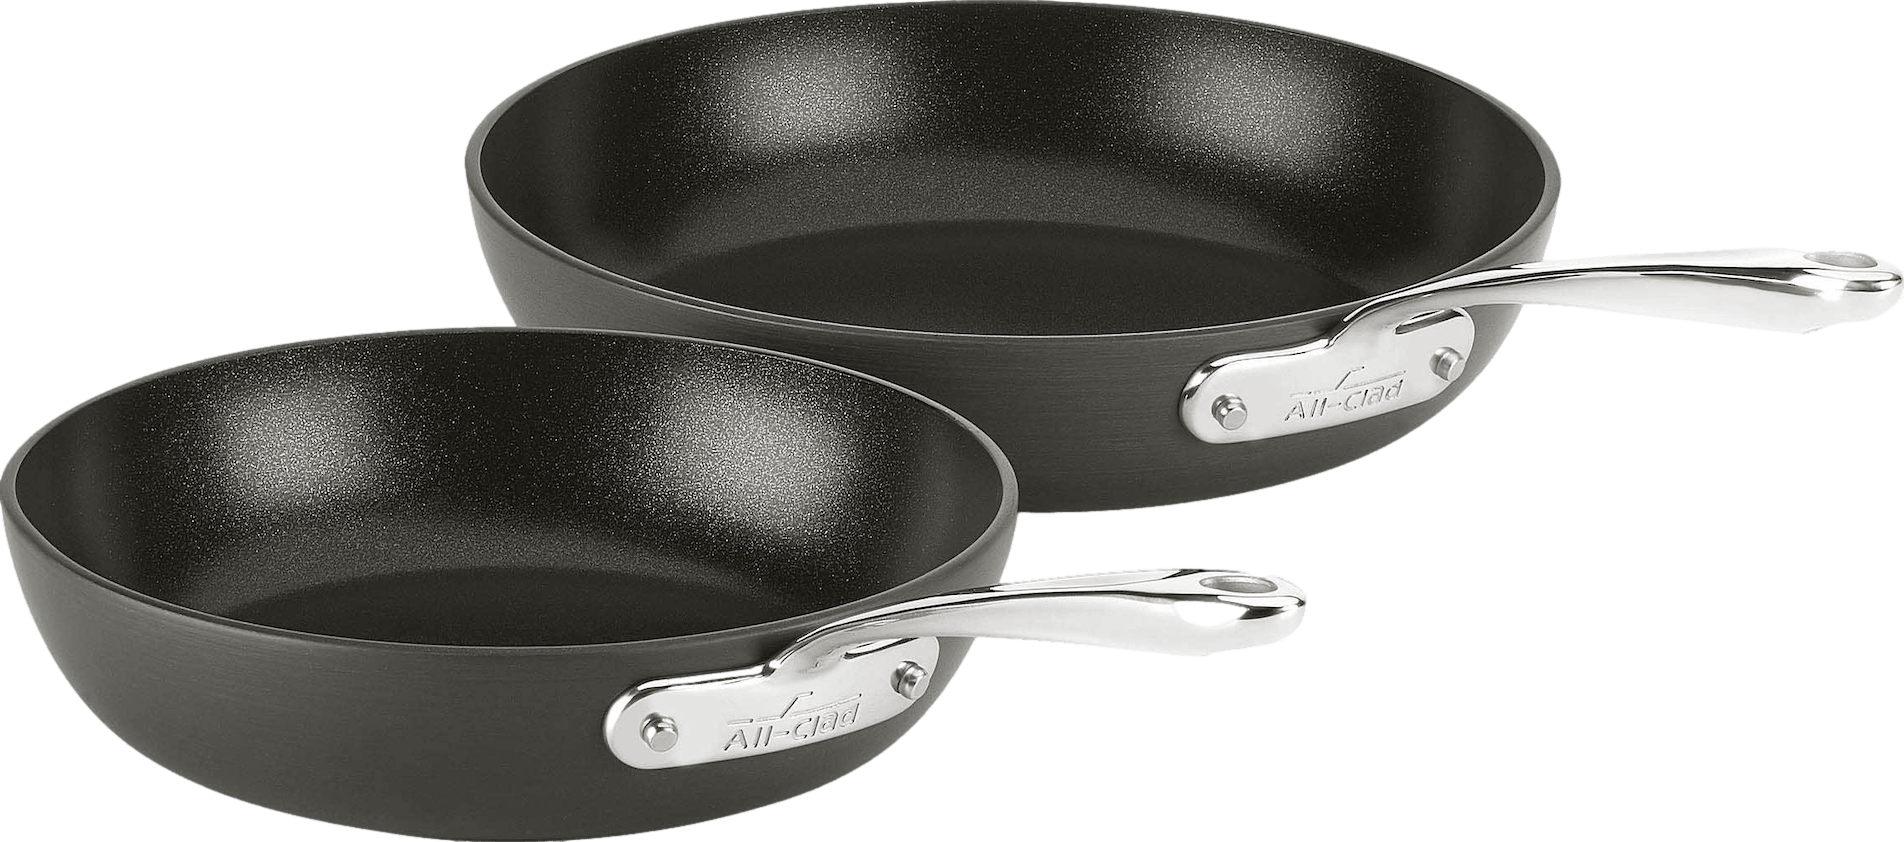 Create Delicious 2-Piece Nonstick Induction Frying Pan Set